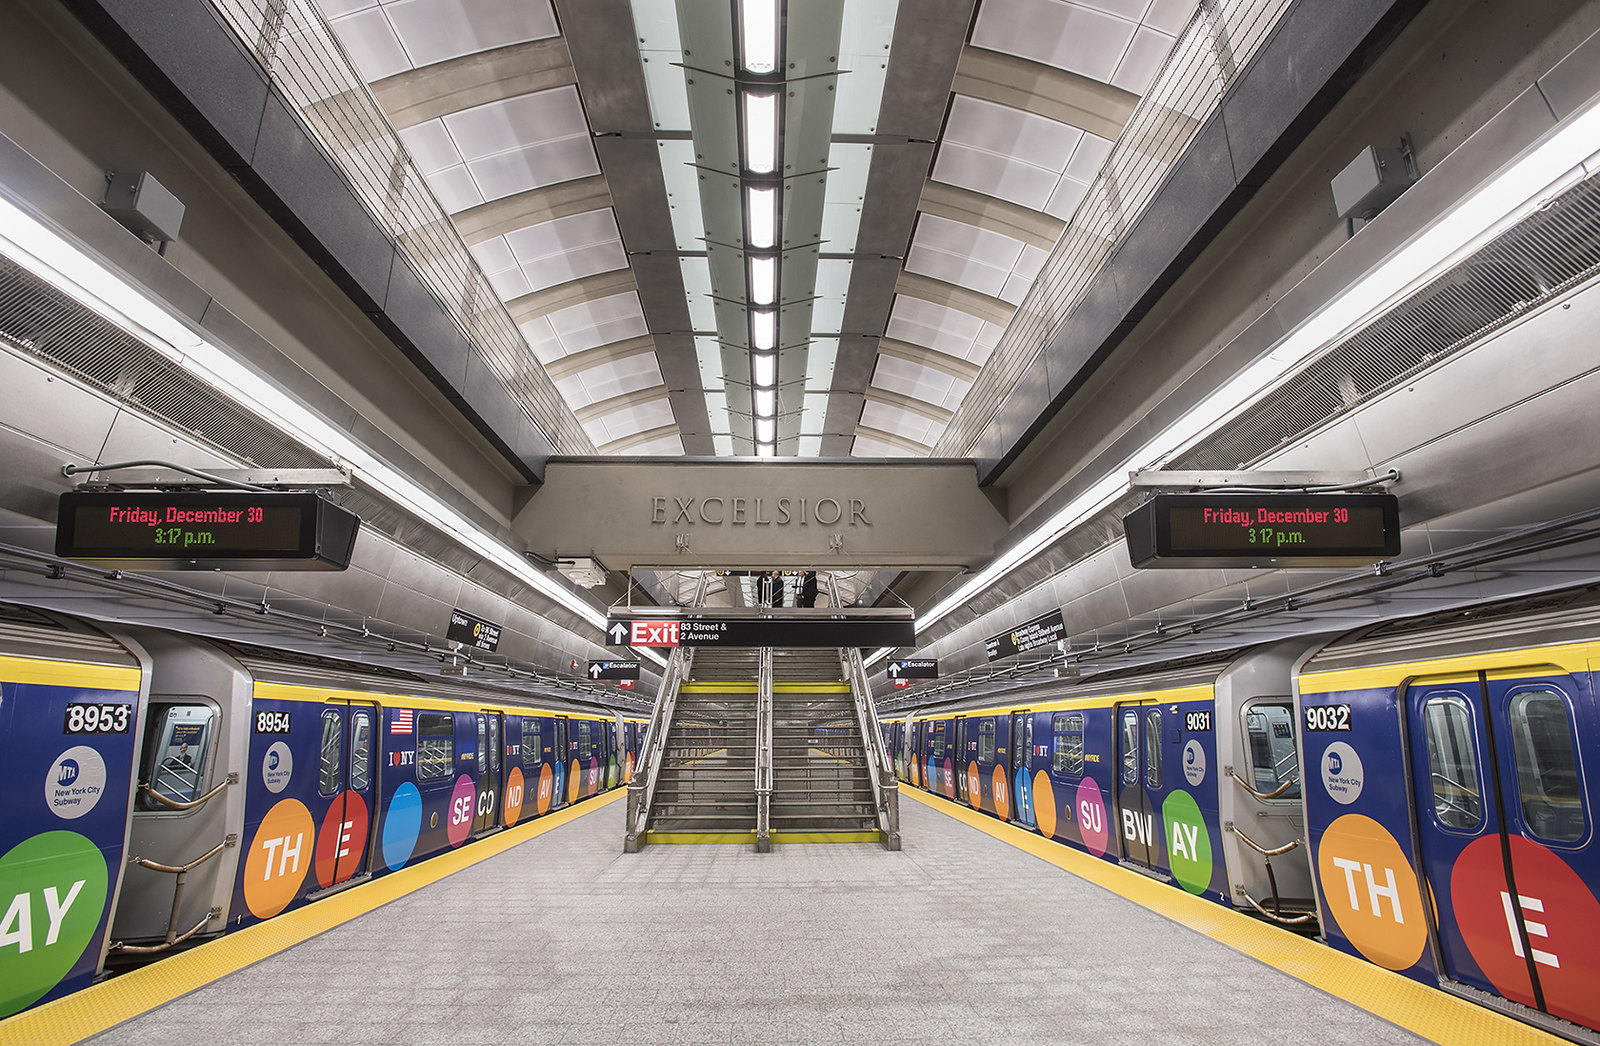 Photo of a subway station interior, which the MTA has jurisdiction over